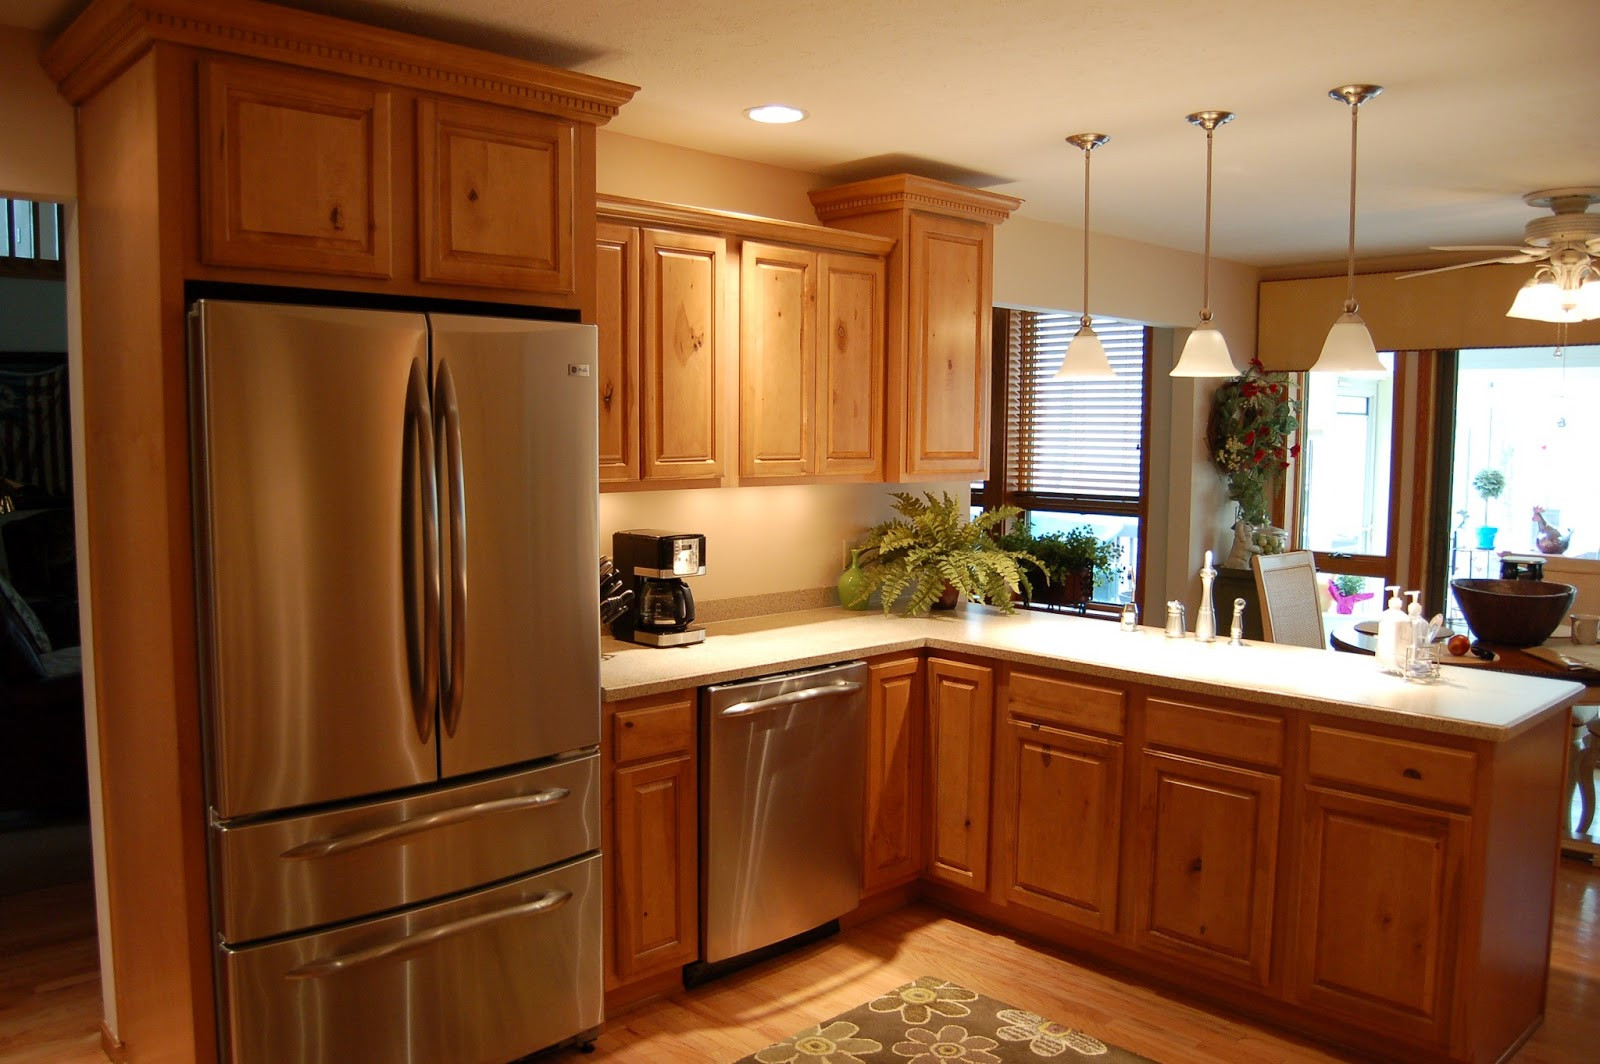 Kitchen Remodels With Oak Cabinets
 Chicago Kitchen Remodeling Ideas Kitchen Remodeling Chicago